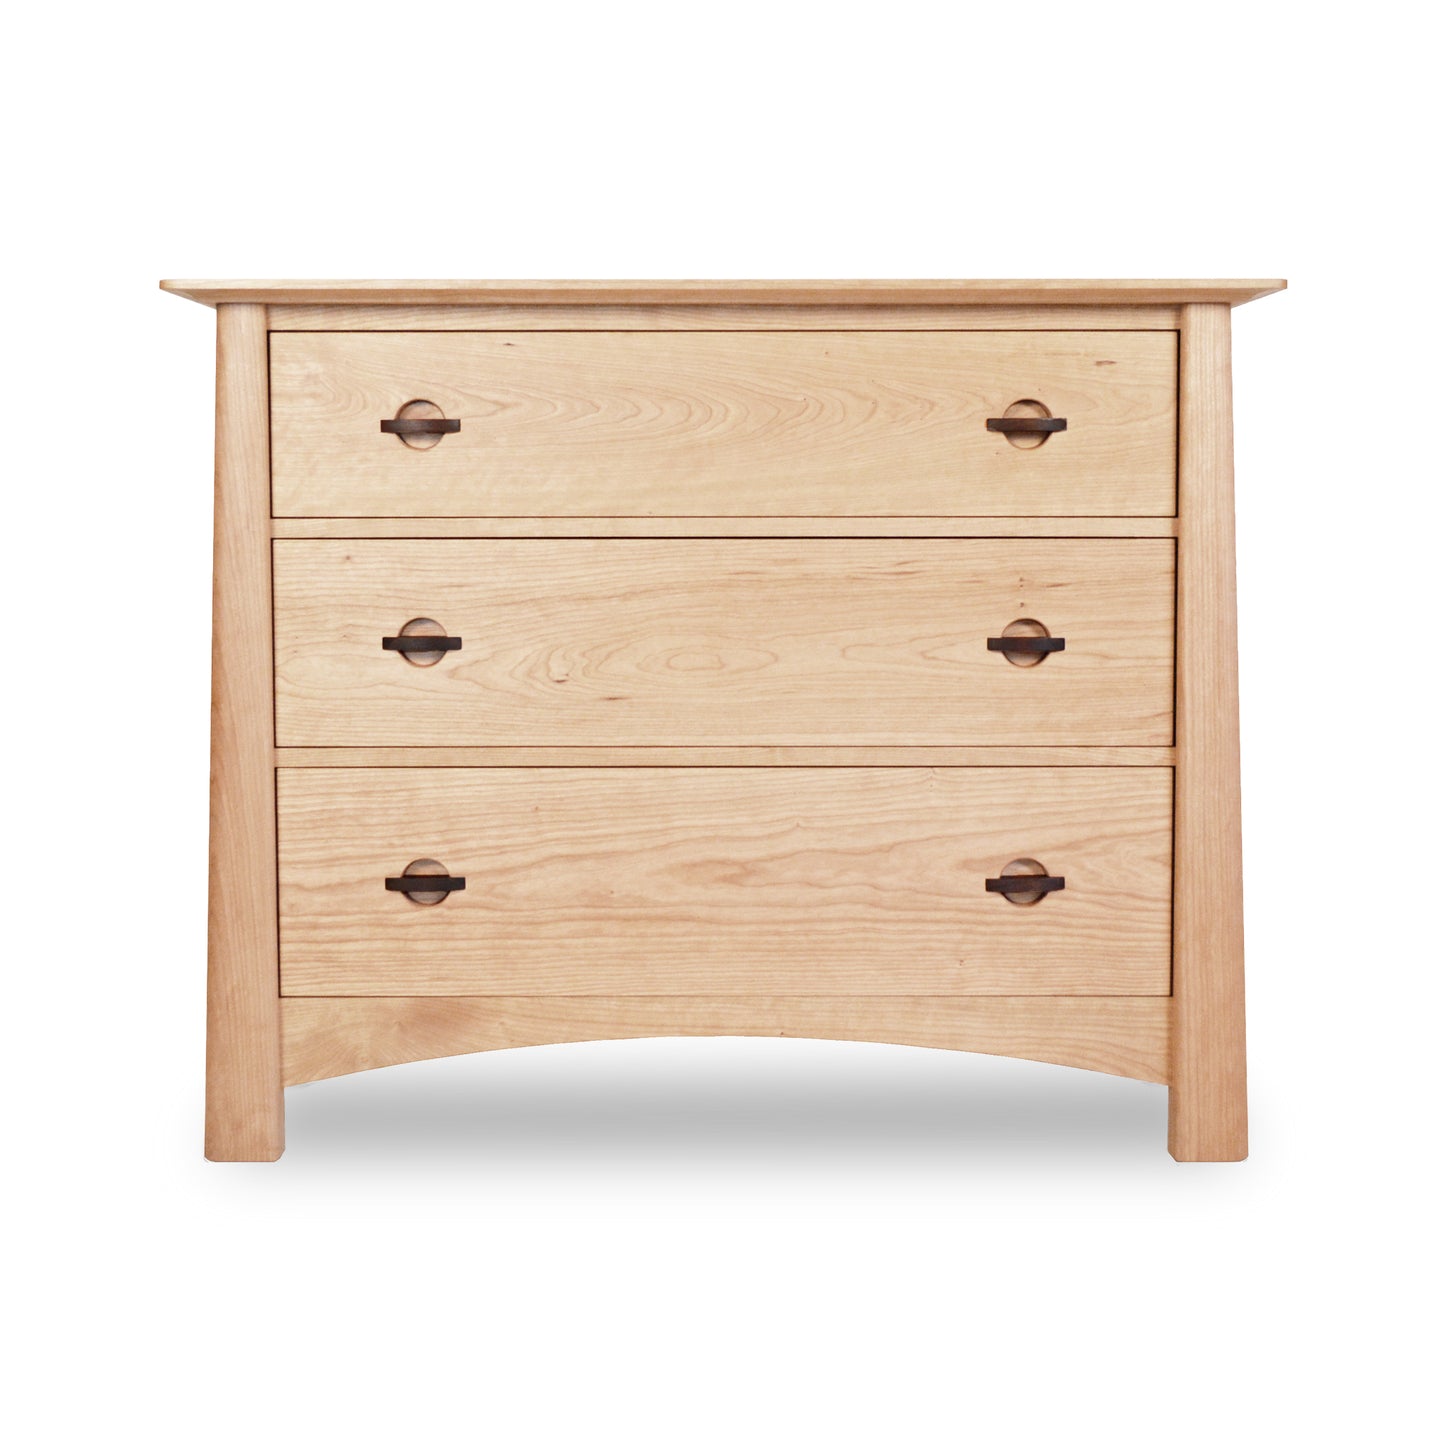 A light wooden Maple Corner Woodworks Cherry Moon 3-Drawer Chest with round, dark metal handles, isolated on a white background. The dresser has softly curved edges and showcases Vermont craftsmanship with a simple, sturdy design.